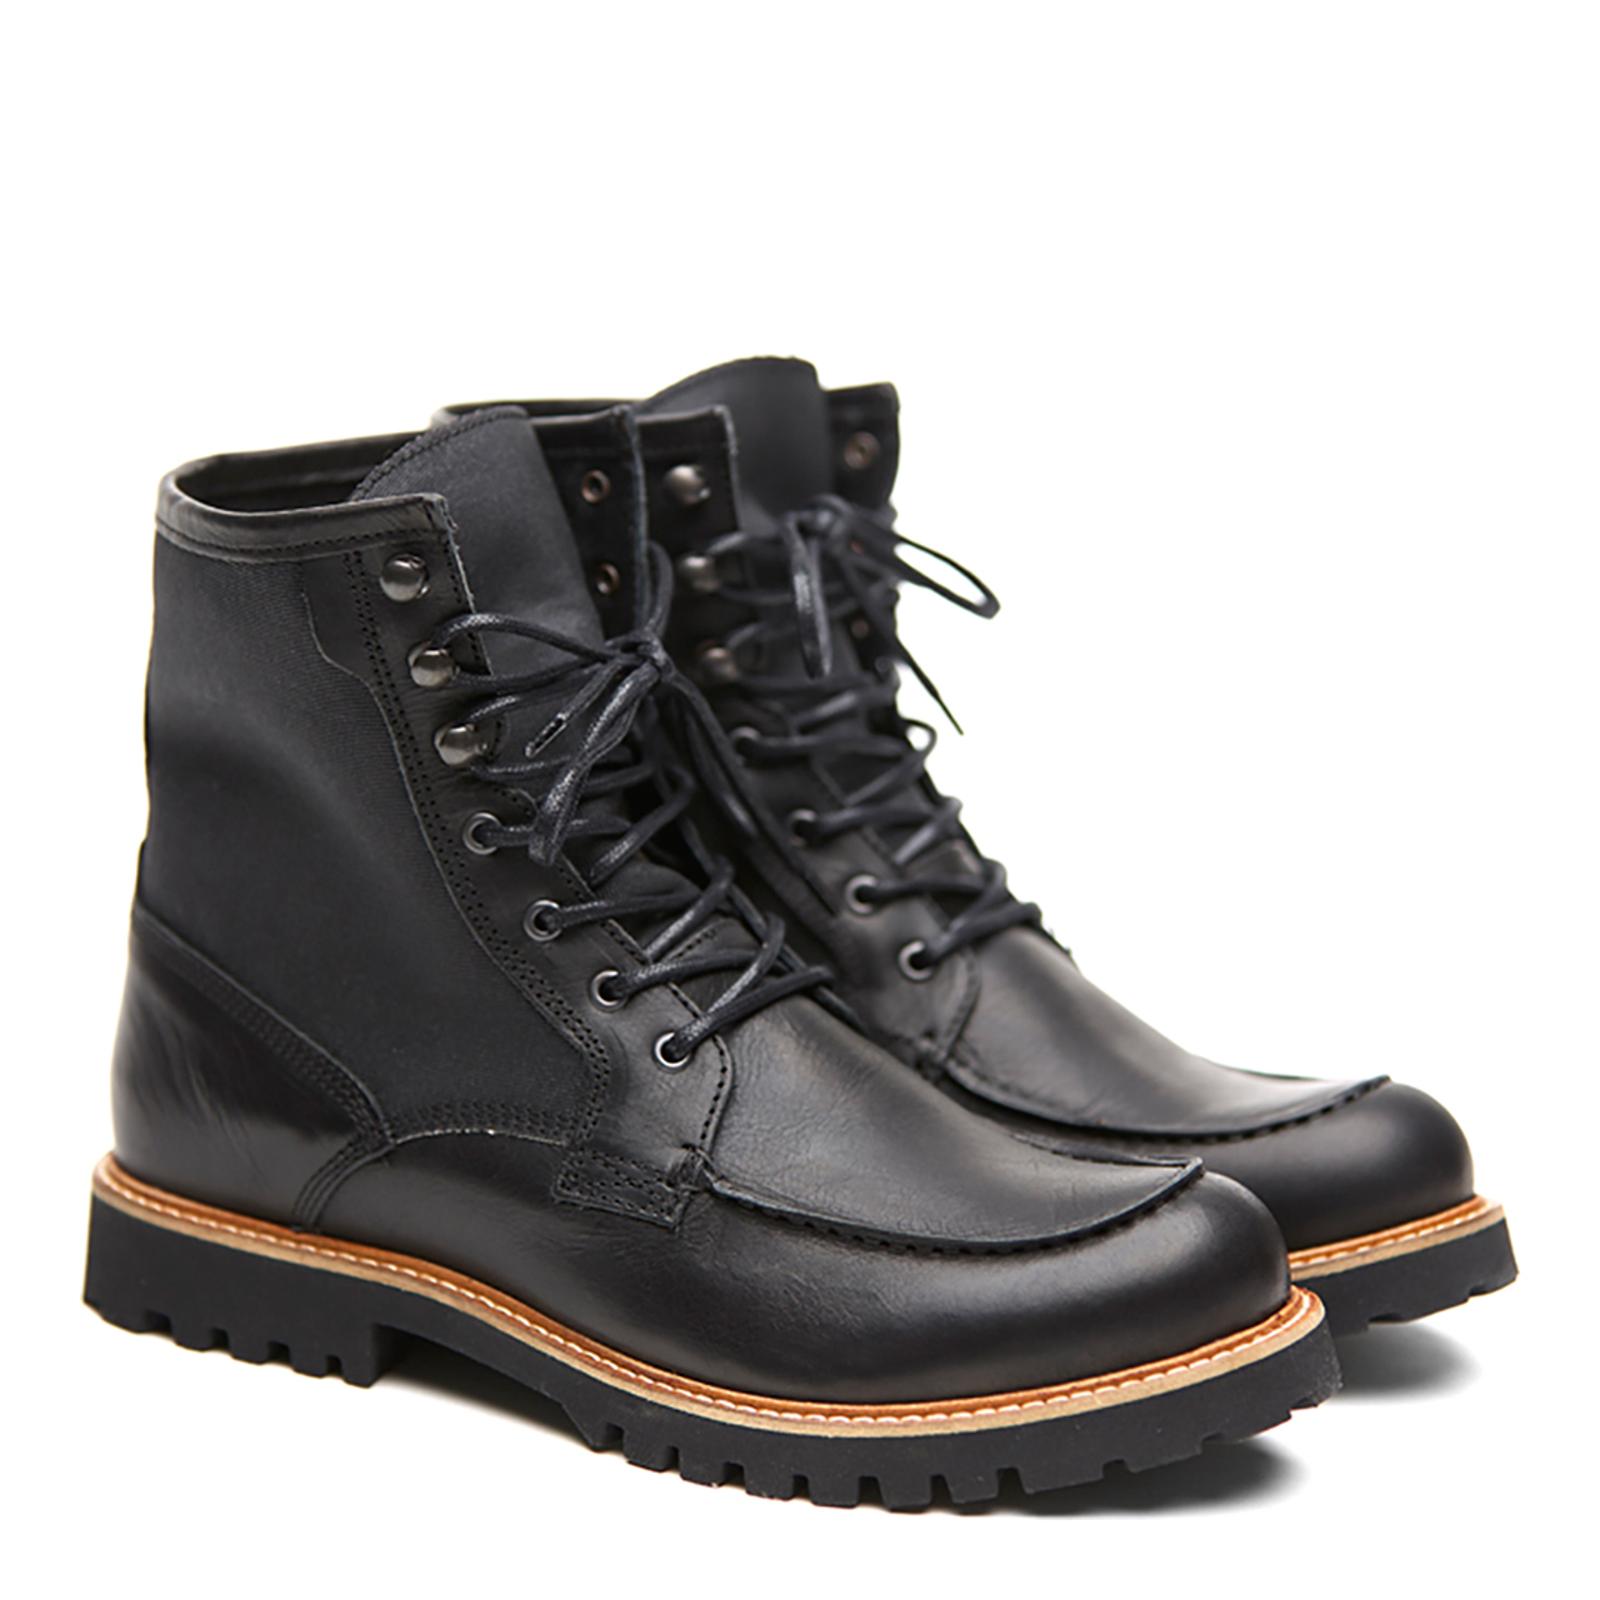 Black Zack Leather/Waxed Canvas Boots - BrandAlley